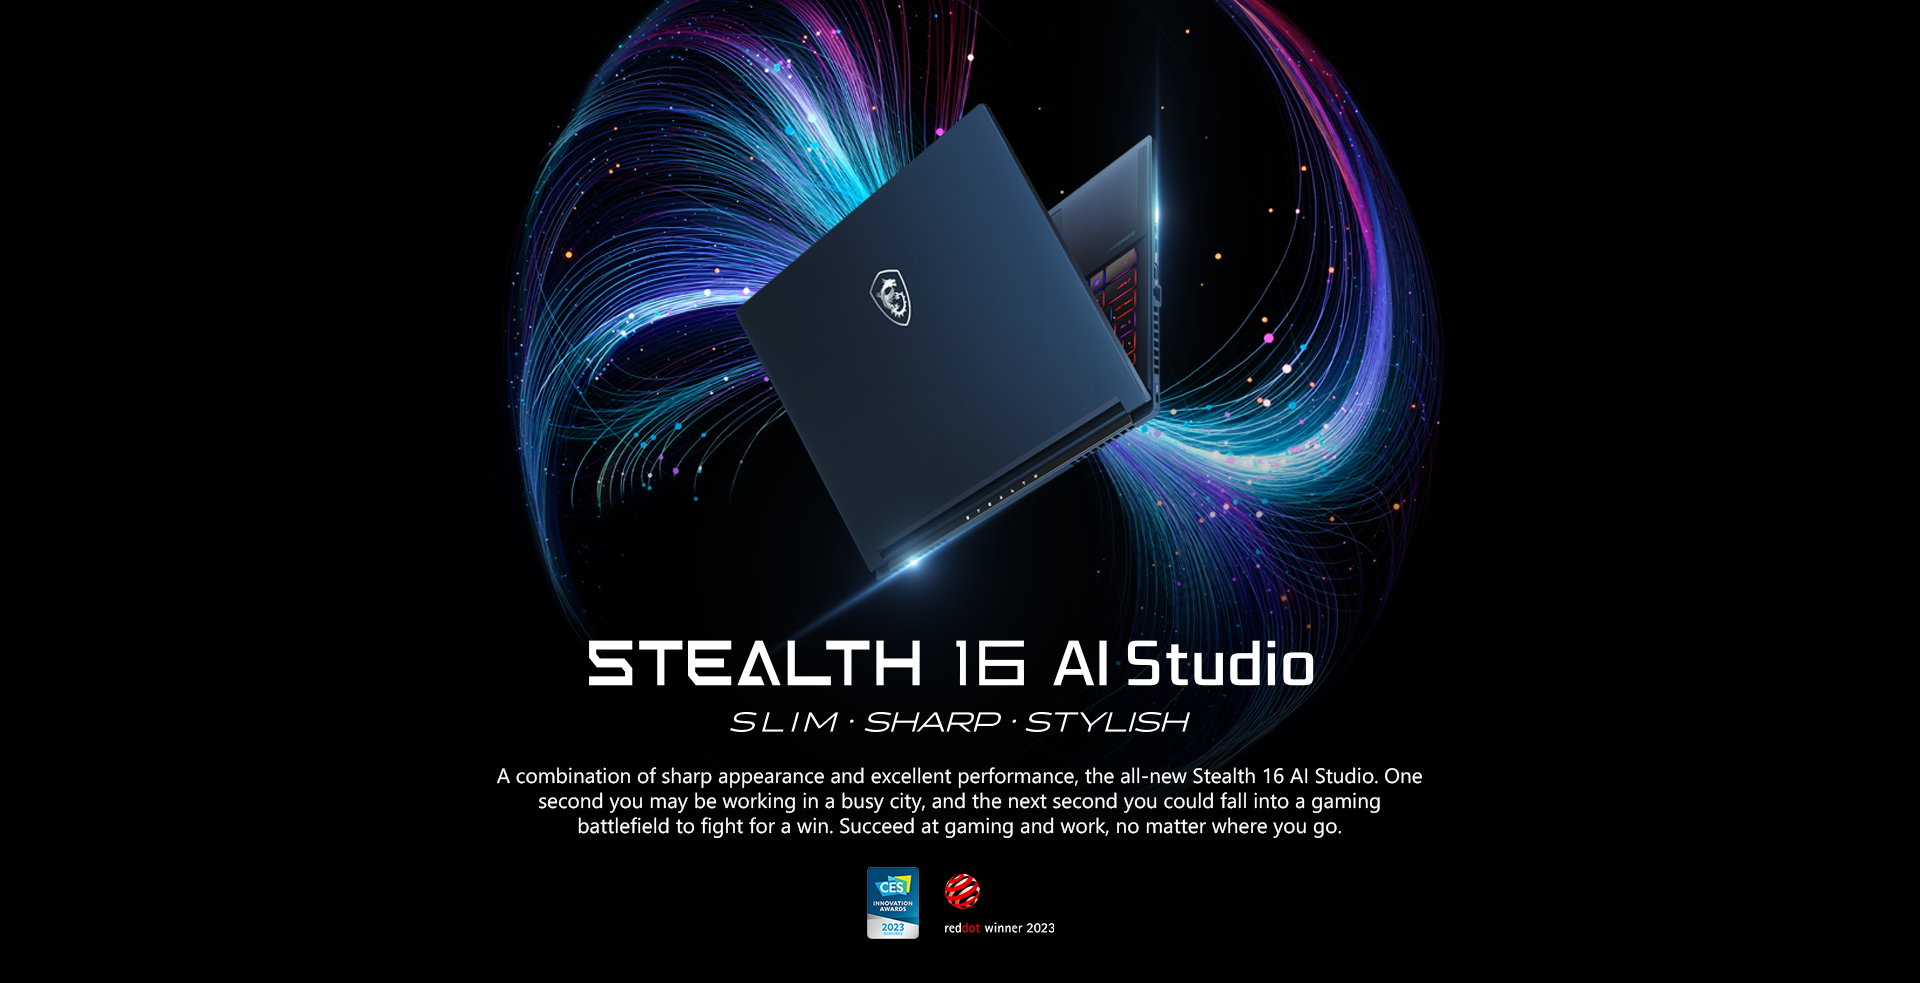 A combination of sharp appearance and excellent performance, the all-new Stealth 16 AI Studio. One second you may be working in a busy city, and the next second you could fall into a gaming battlefield to fight for a win. Succeed at gaming and work, no matter where you go.